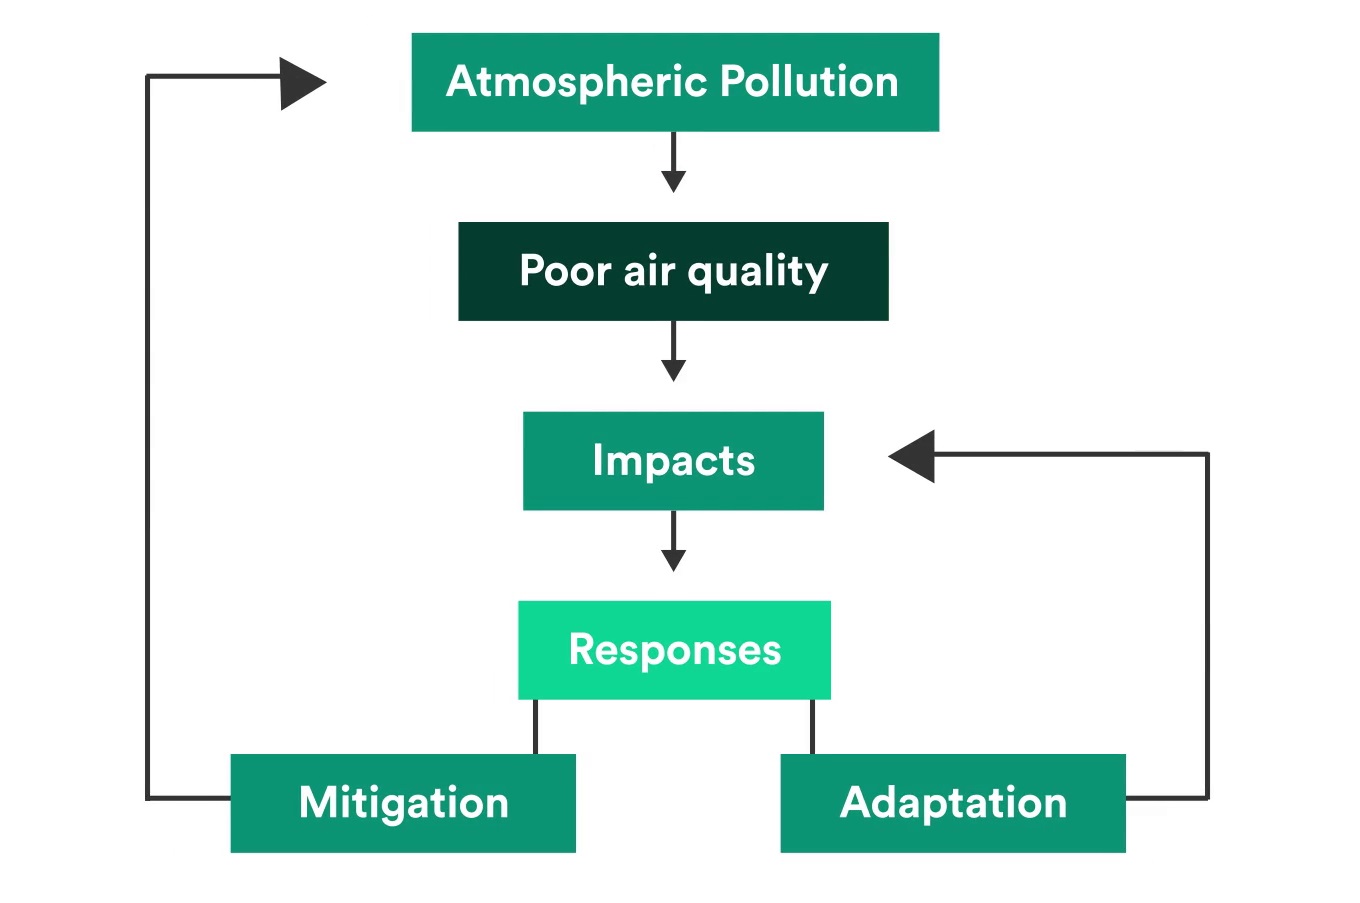 The flow chart shows how mitigation is about trying to reduce the levels atmospheric pollution, whereas adaptation is looking to reduce the impacts of the poor air quality.